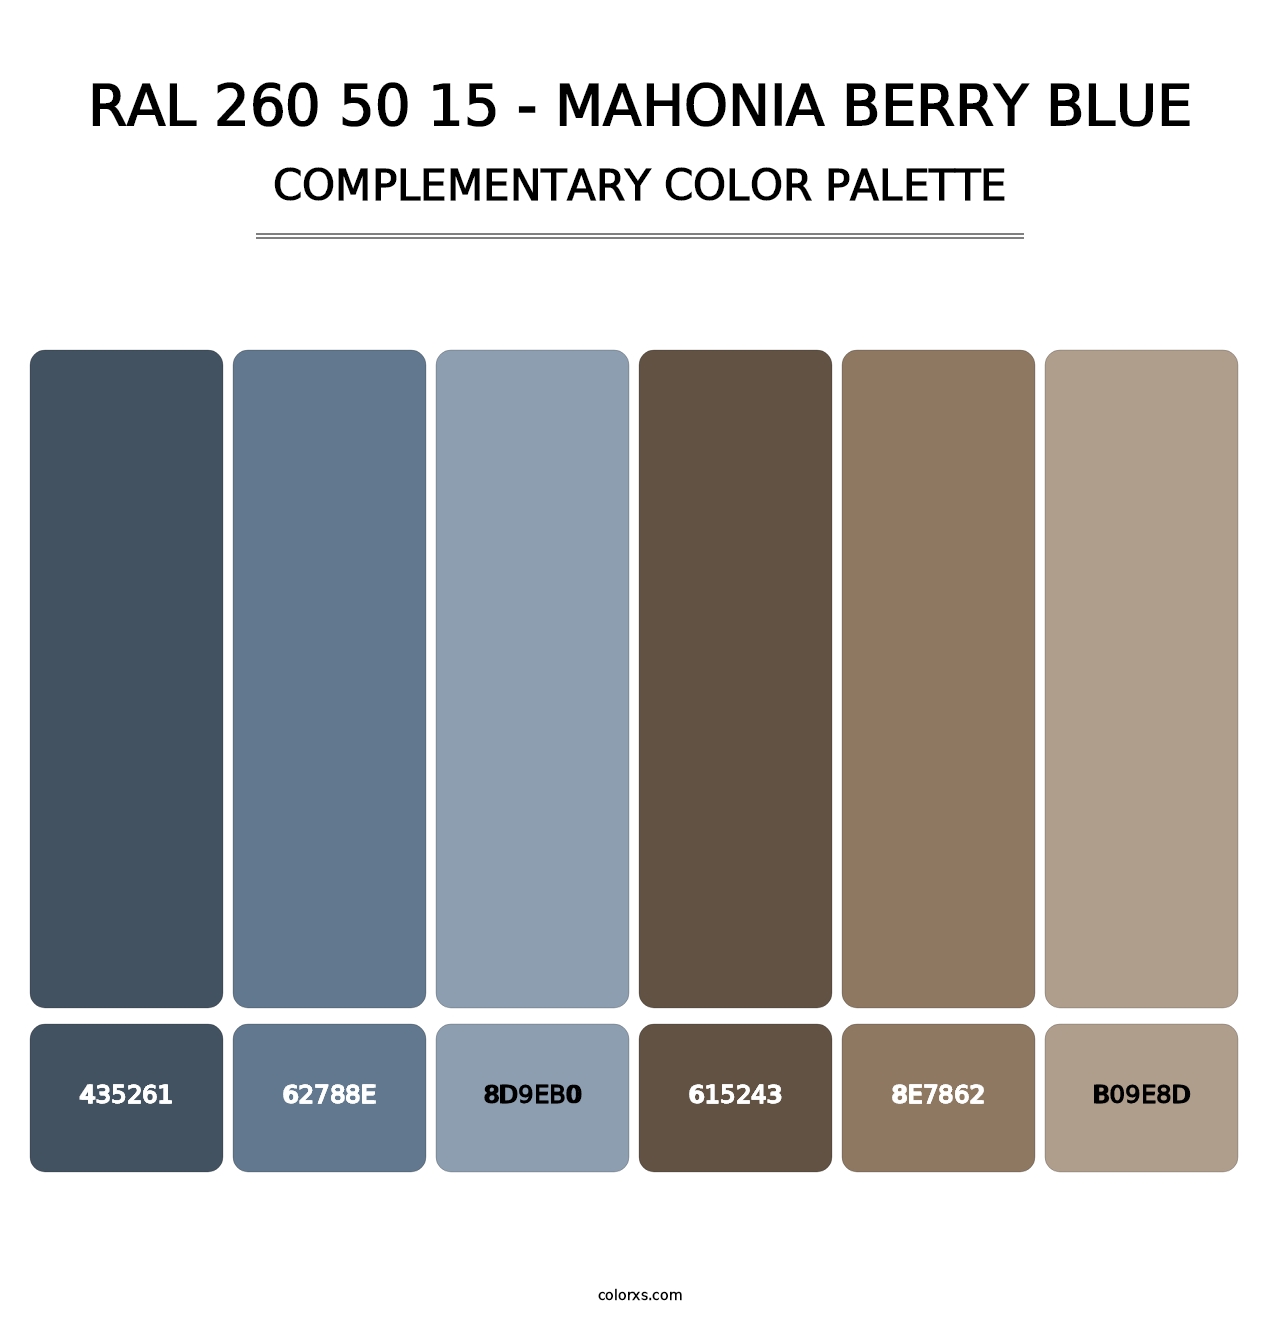 RAL 260 50 15 - Mahonia Berry Blue - Complementary Color Palette